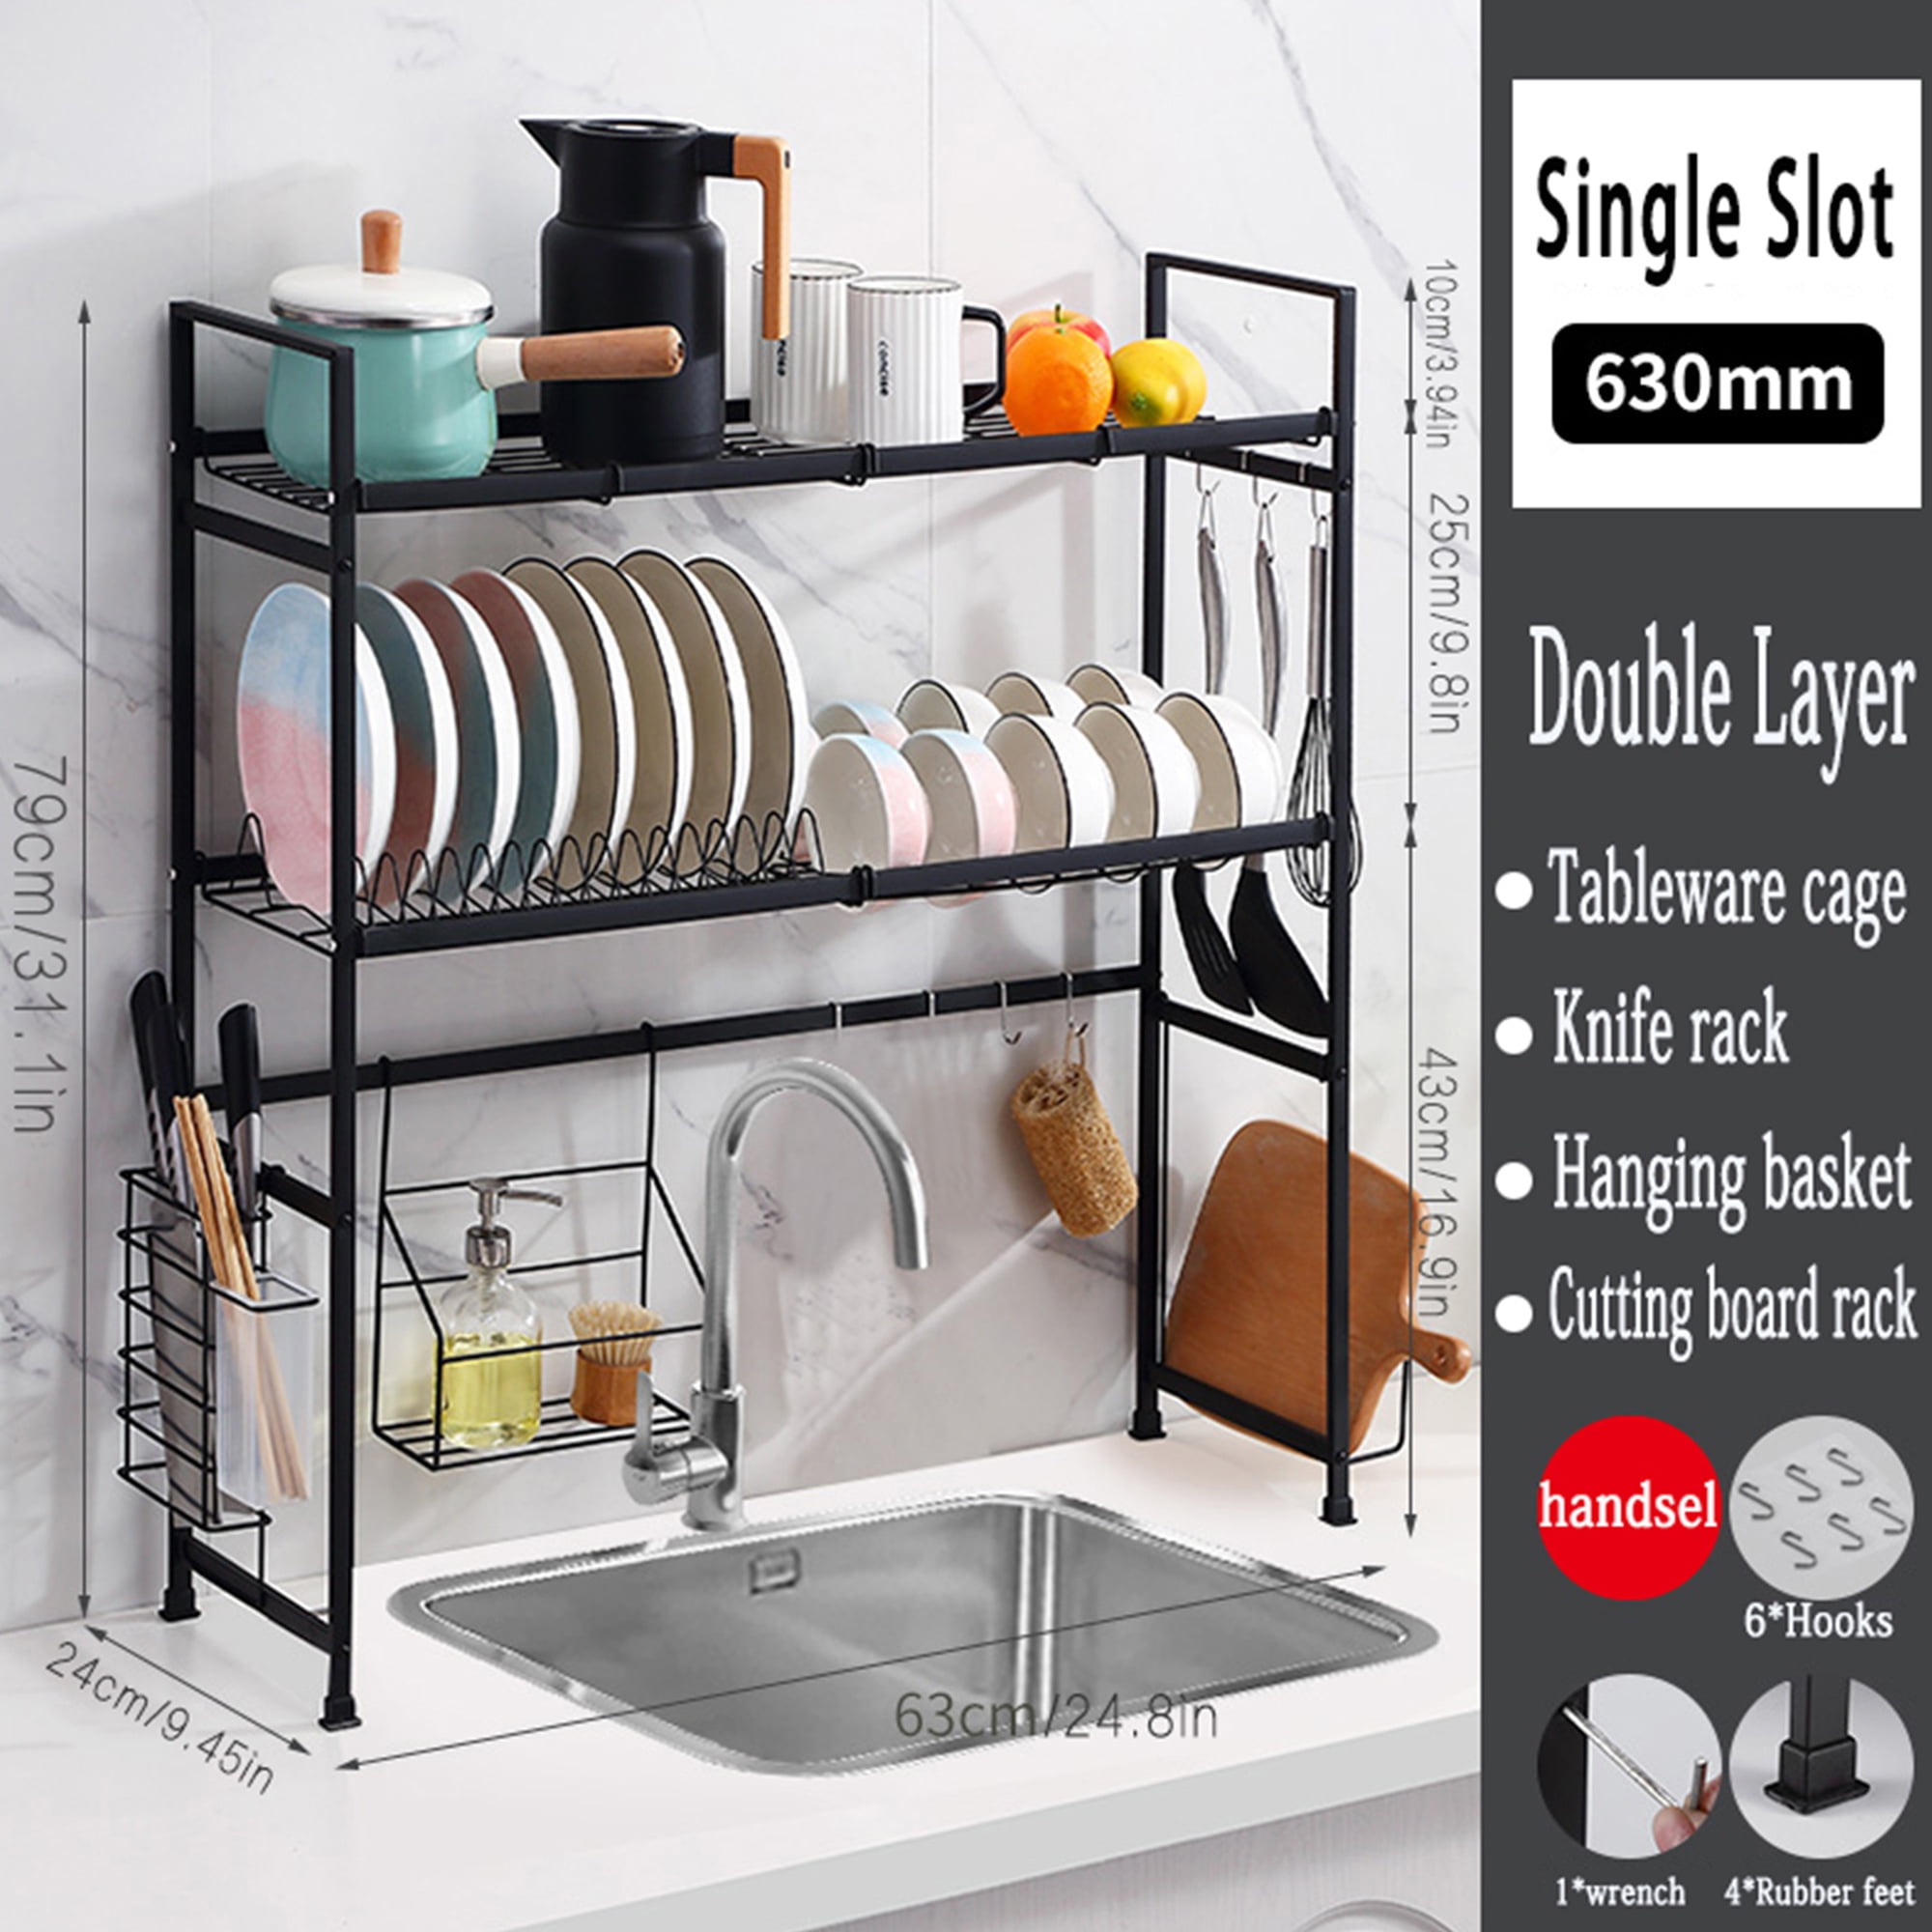 Doitsf Dish Drying Rack, Dish Racks for Kitchen Counter, Stainless Steel  Dish Rack with Extra Sponge Holder Drying Rack for Kitchen Sink, Dish  Drainer